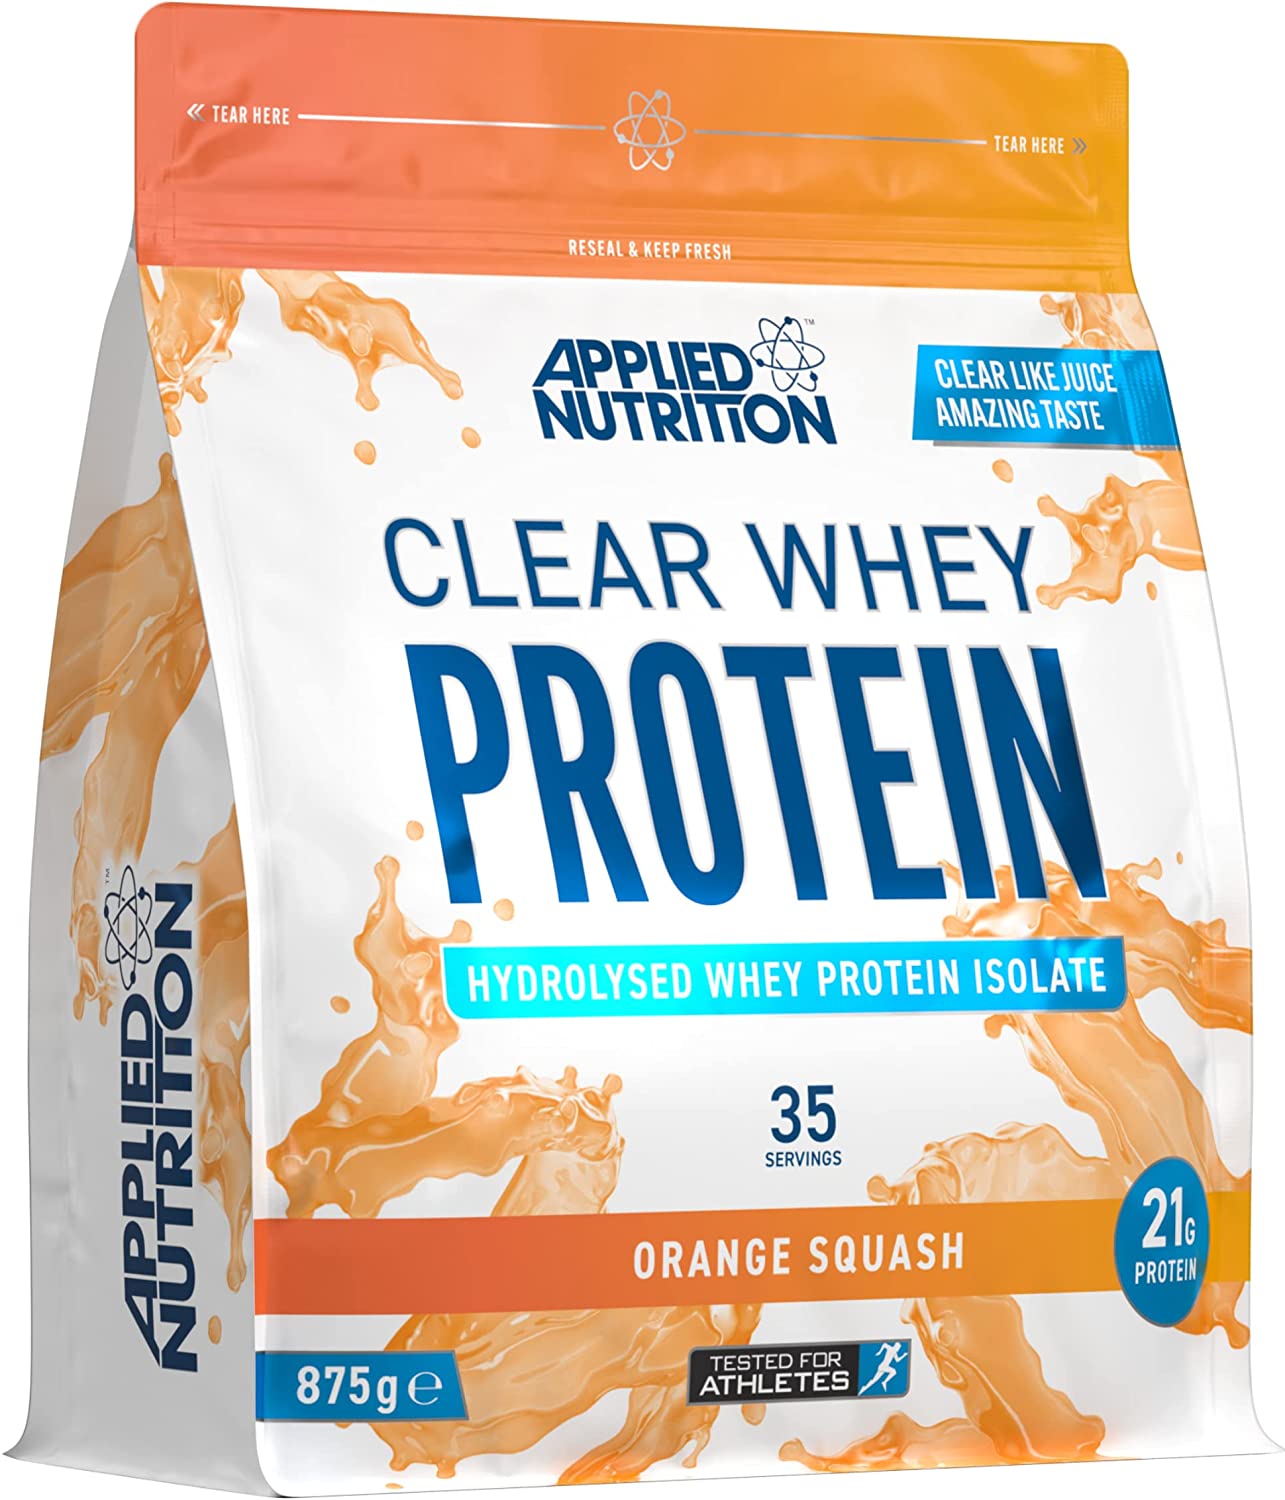 Photos - Protein Applied Nutrition Clear Whey Isolate 875g 35 Servings, Orange Squash APP10 